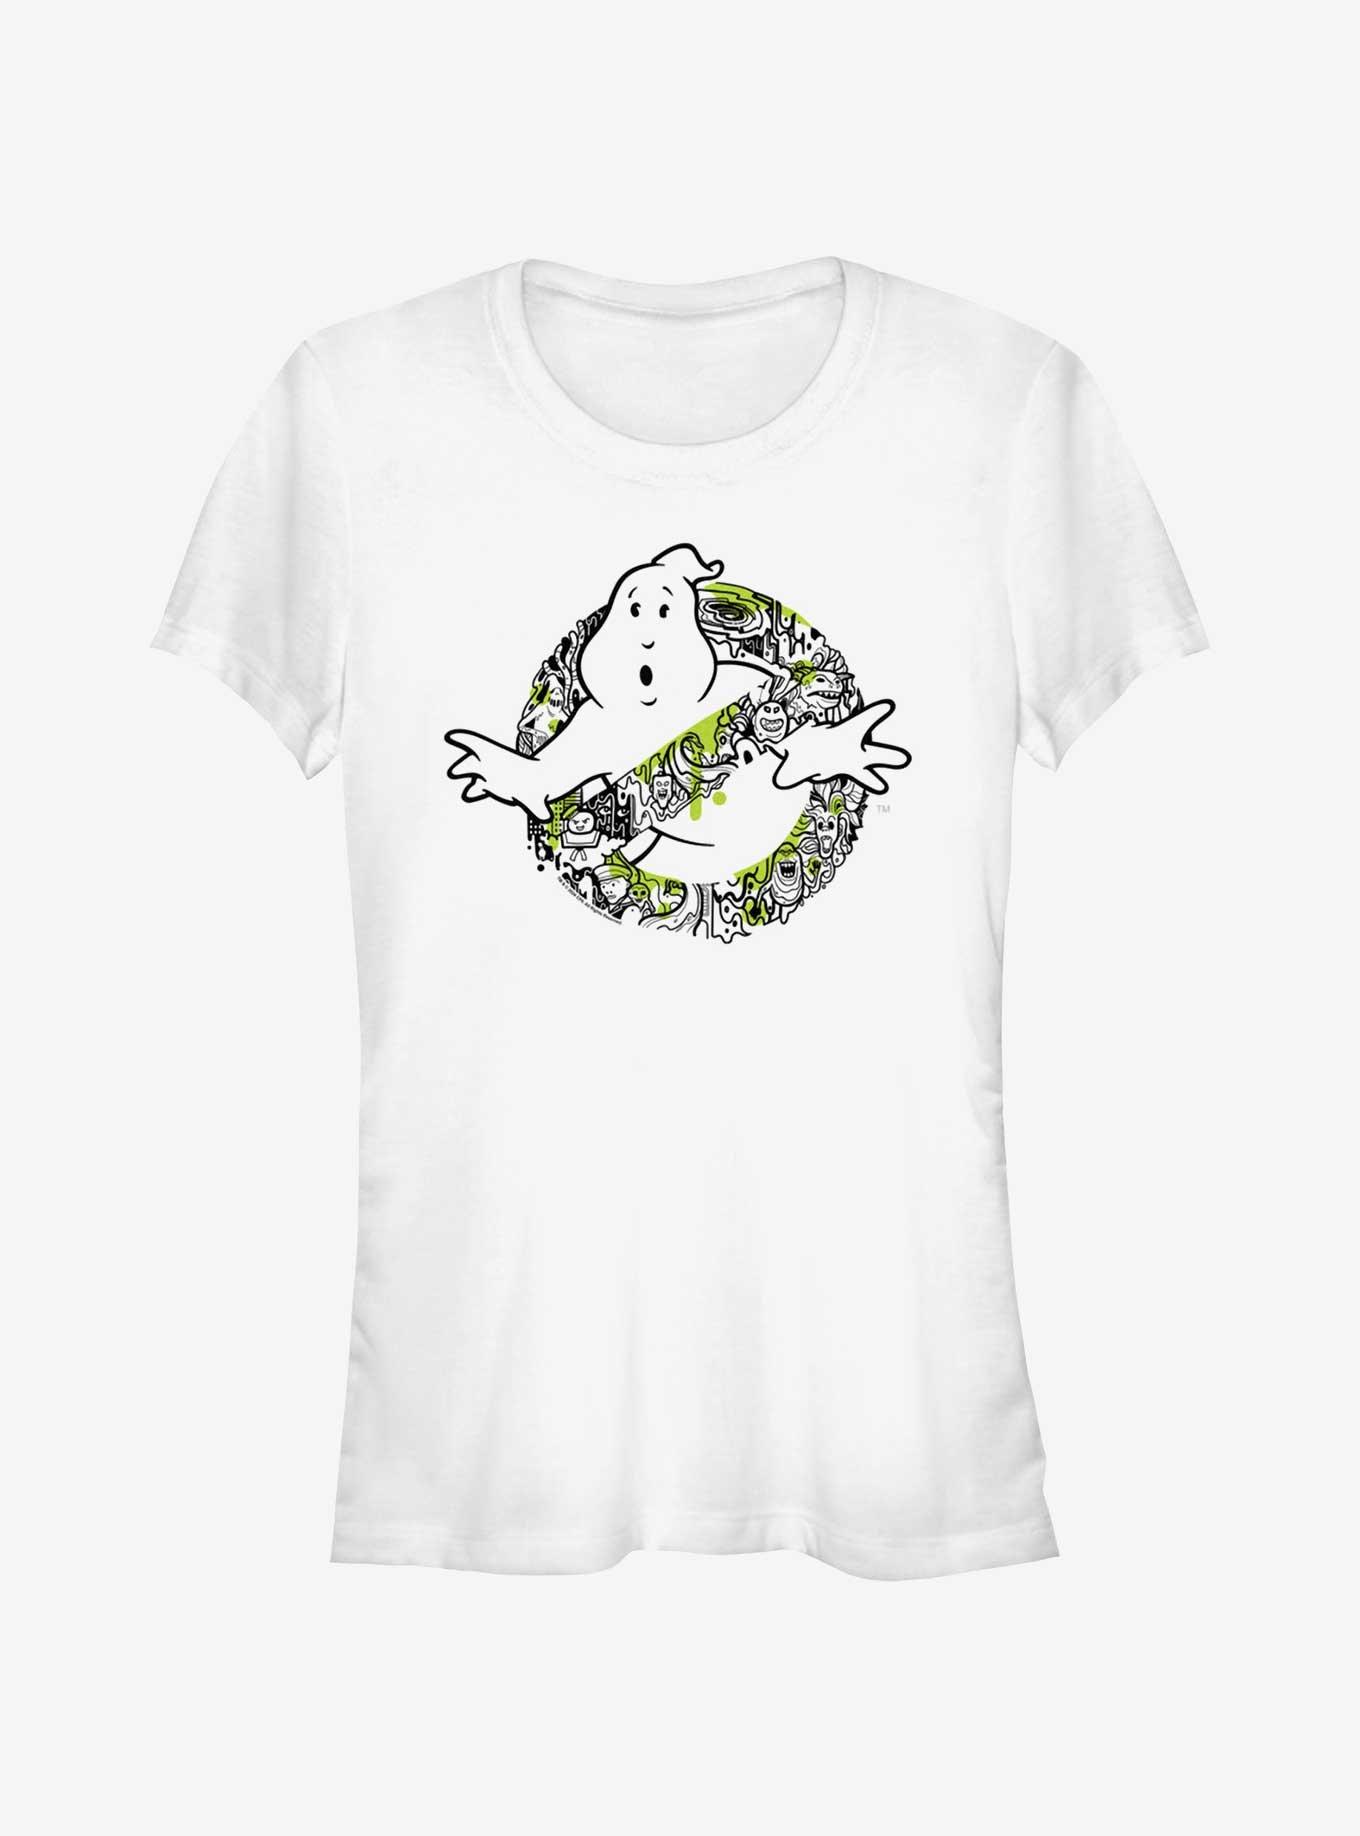 Ghostbusters: Frozen Empire Busting Ghosts Girls T-Shirt, WHITE, hi-res